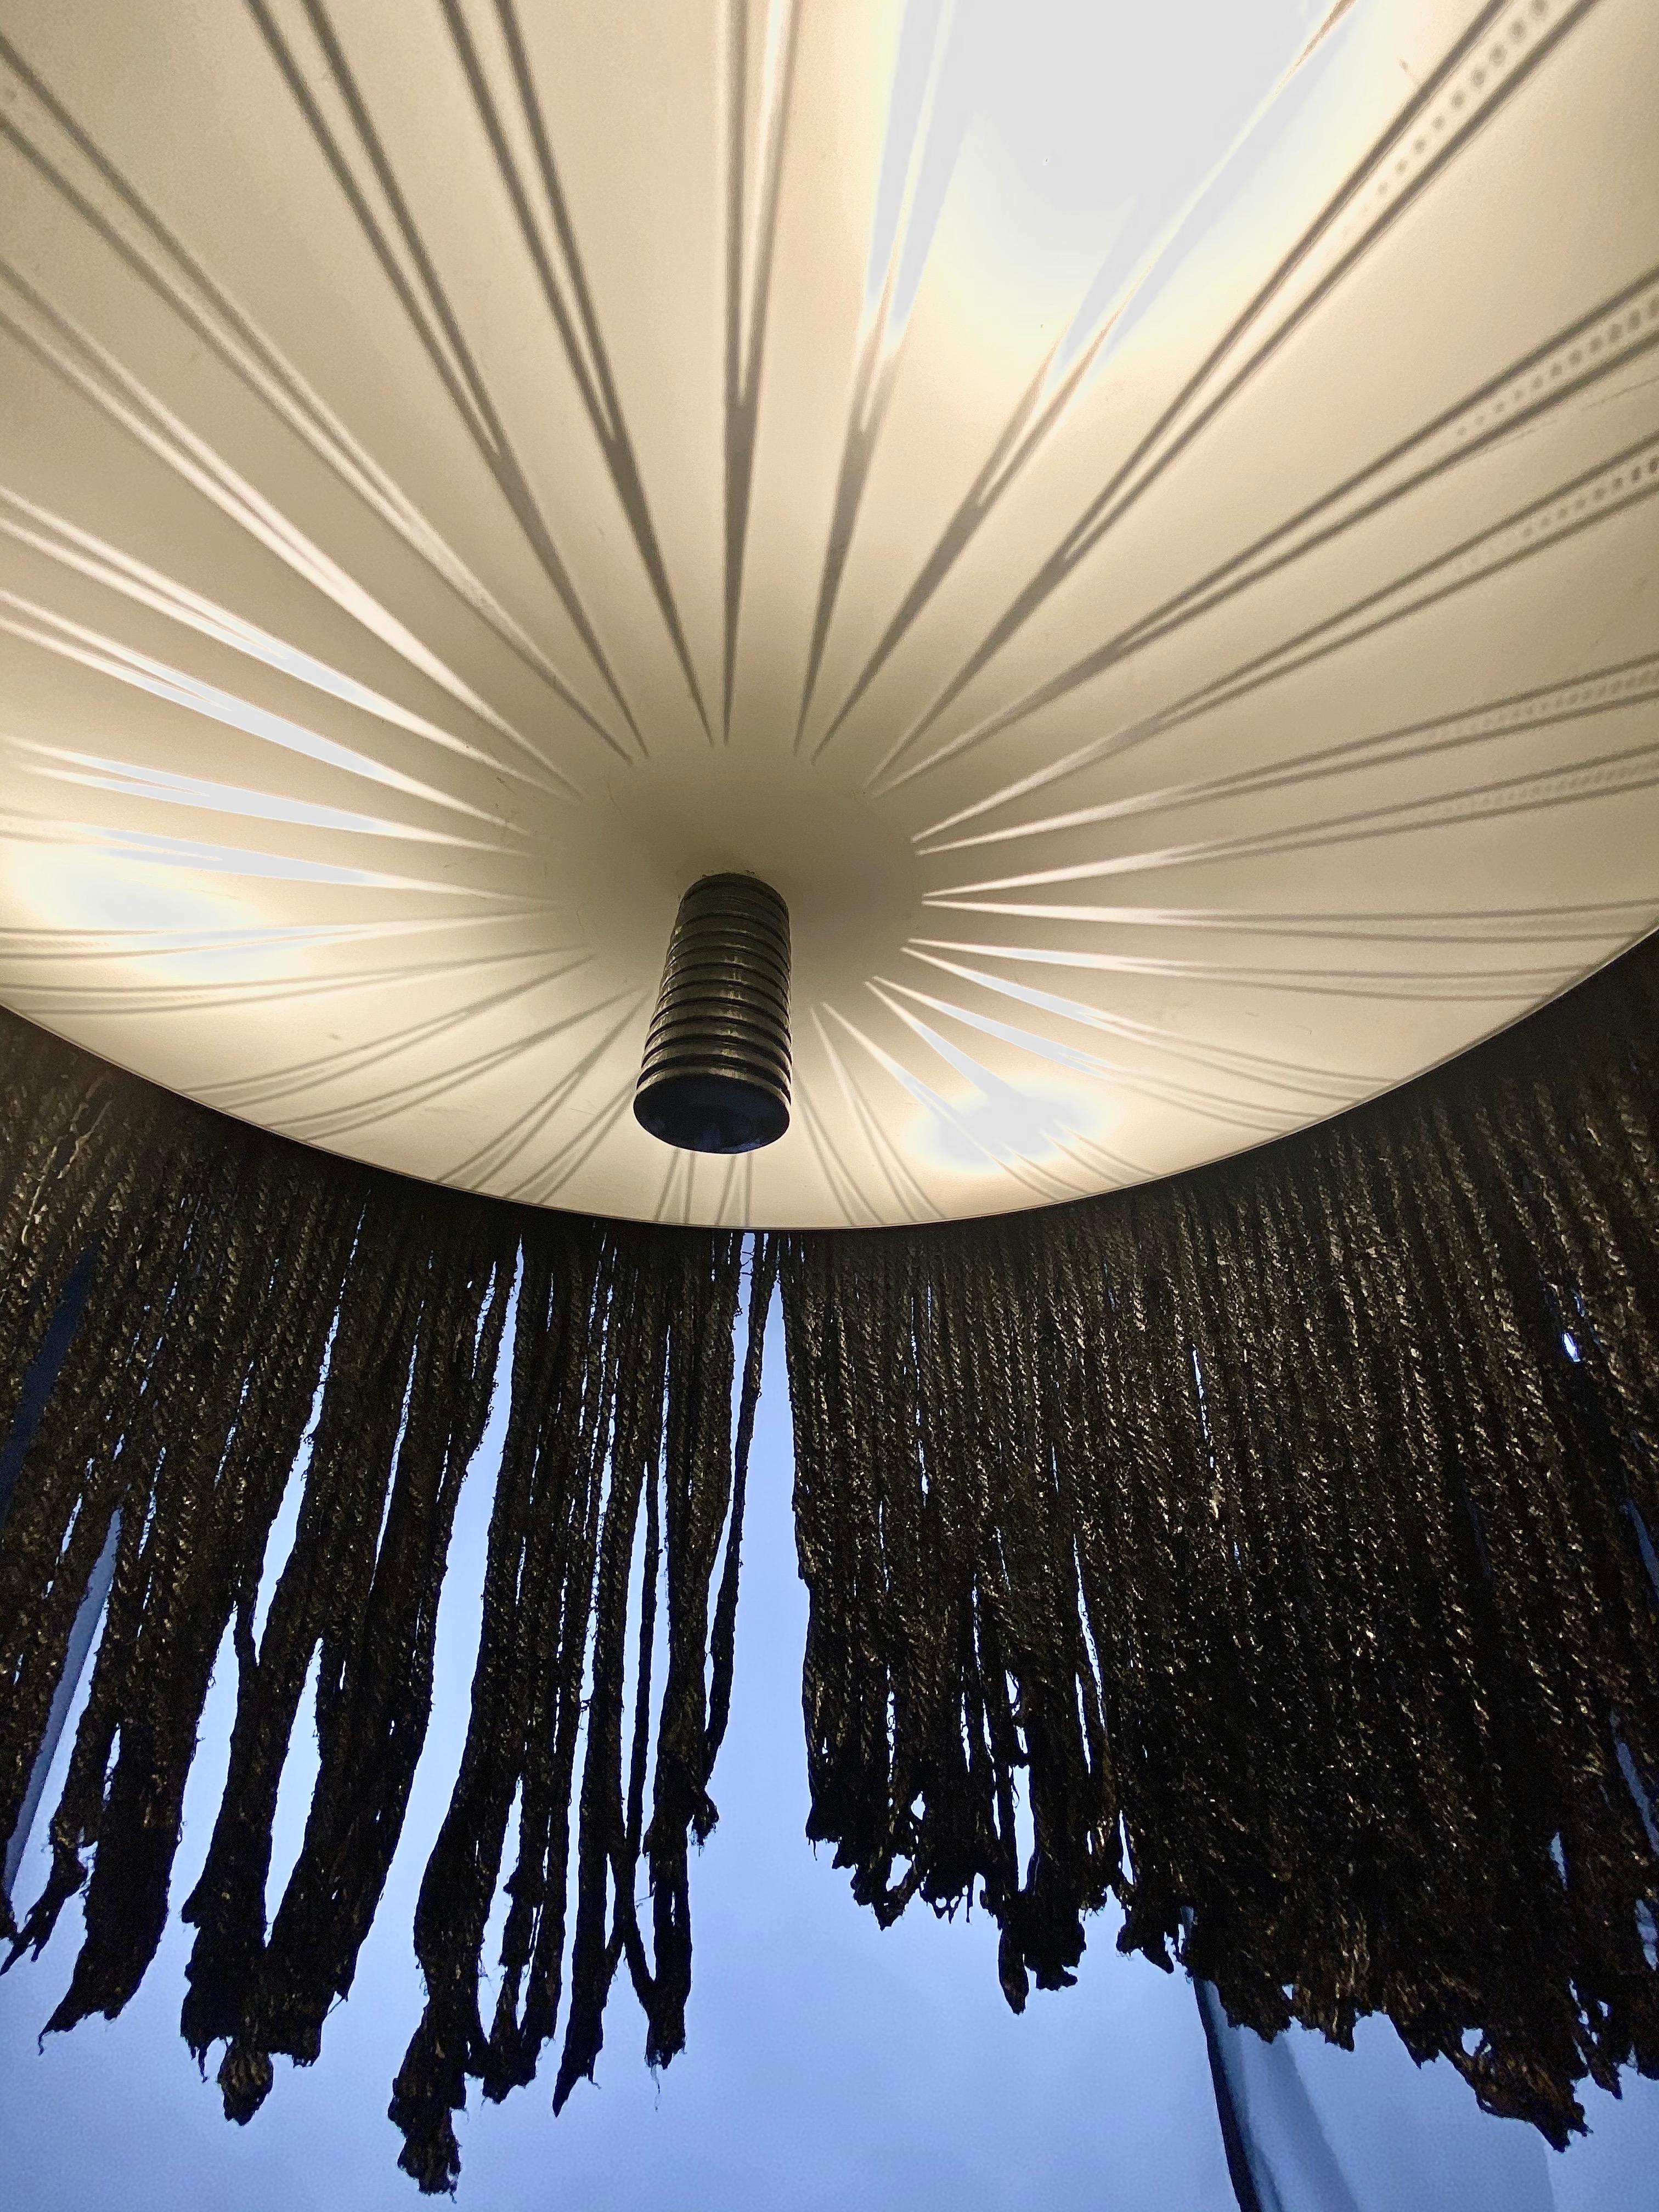 Black Tar Ceiling Lamp or Sculpture, 21st Century by Mattia Biagi In New Condition For Sale In Culver City, CA